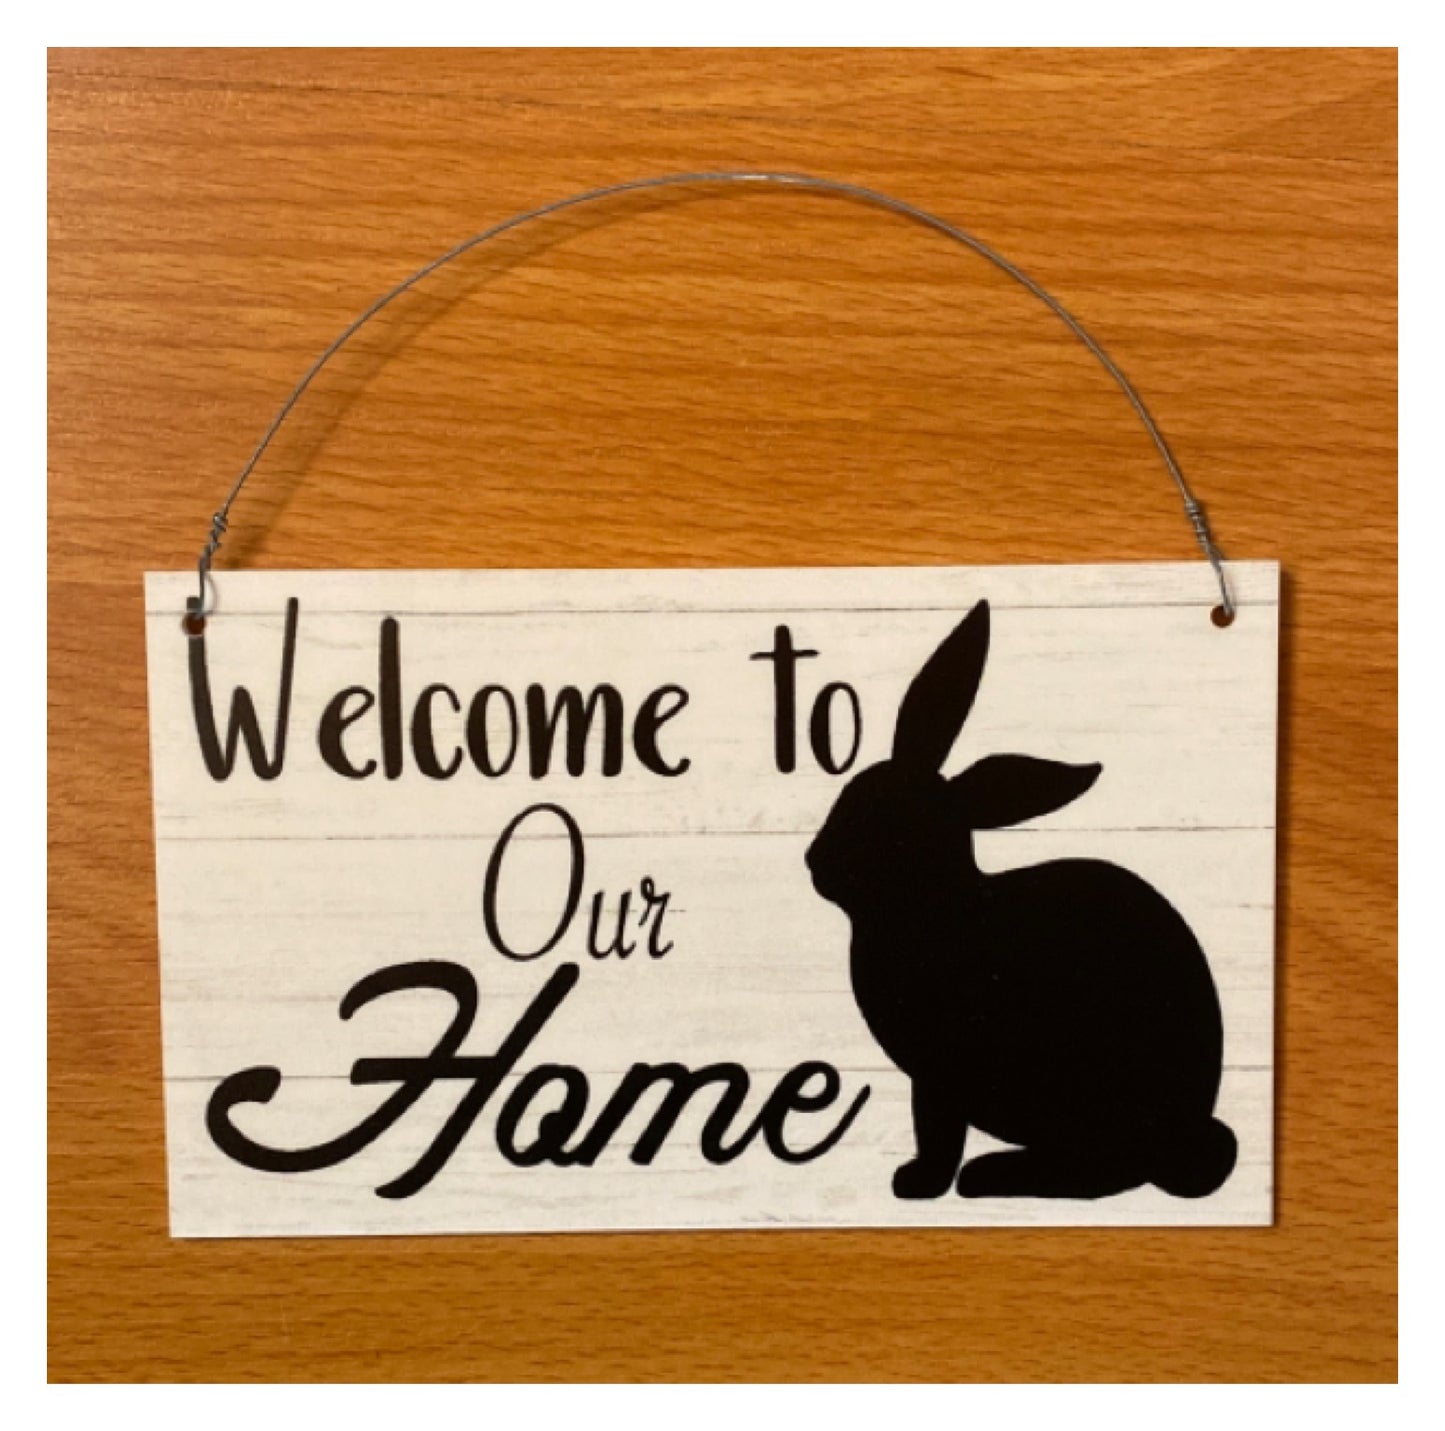 Welcome To Our Home Rabbit Sign - The Renmy Store Homewares & Gifts 